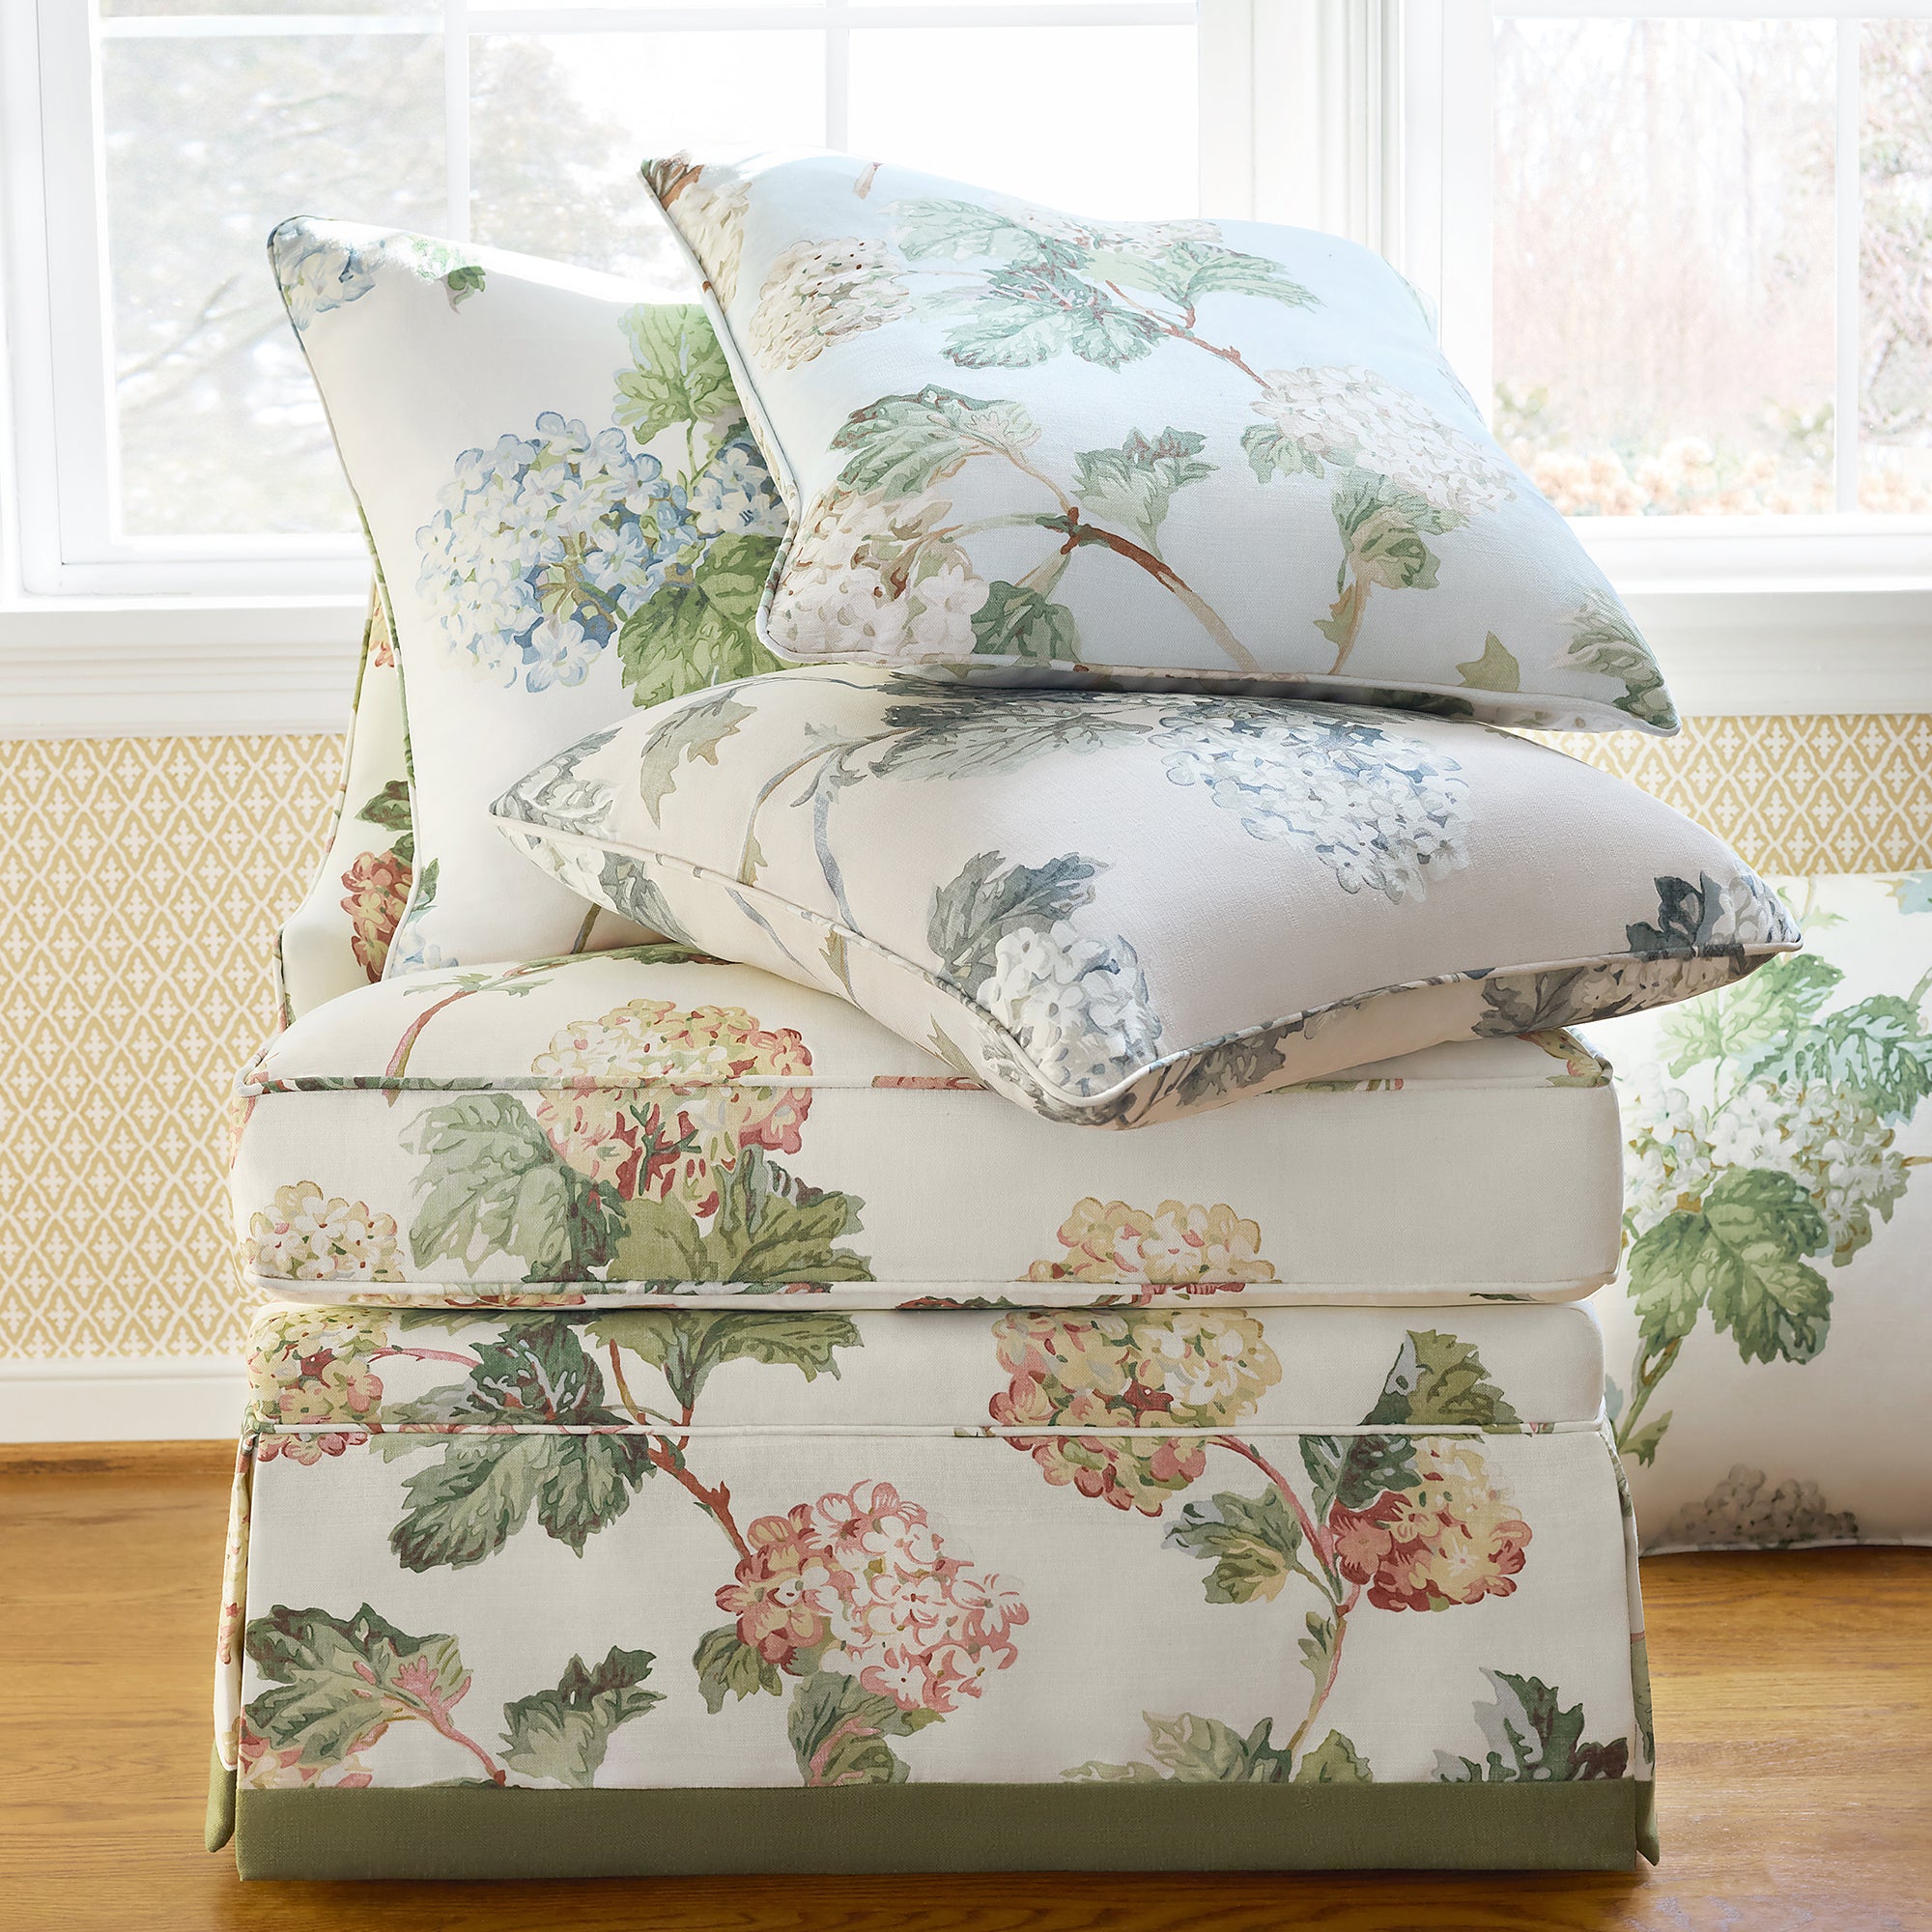 Collection of brentwood chair with skirt and pillow fabrics in Sussex Hydrangea printed fabric featuring white and green color fabric - pattern number AF57849 - by Anna French in the Bristol collection